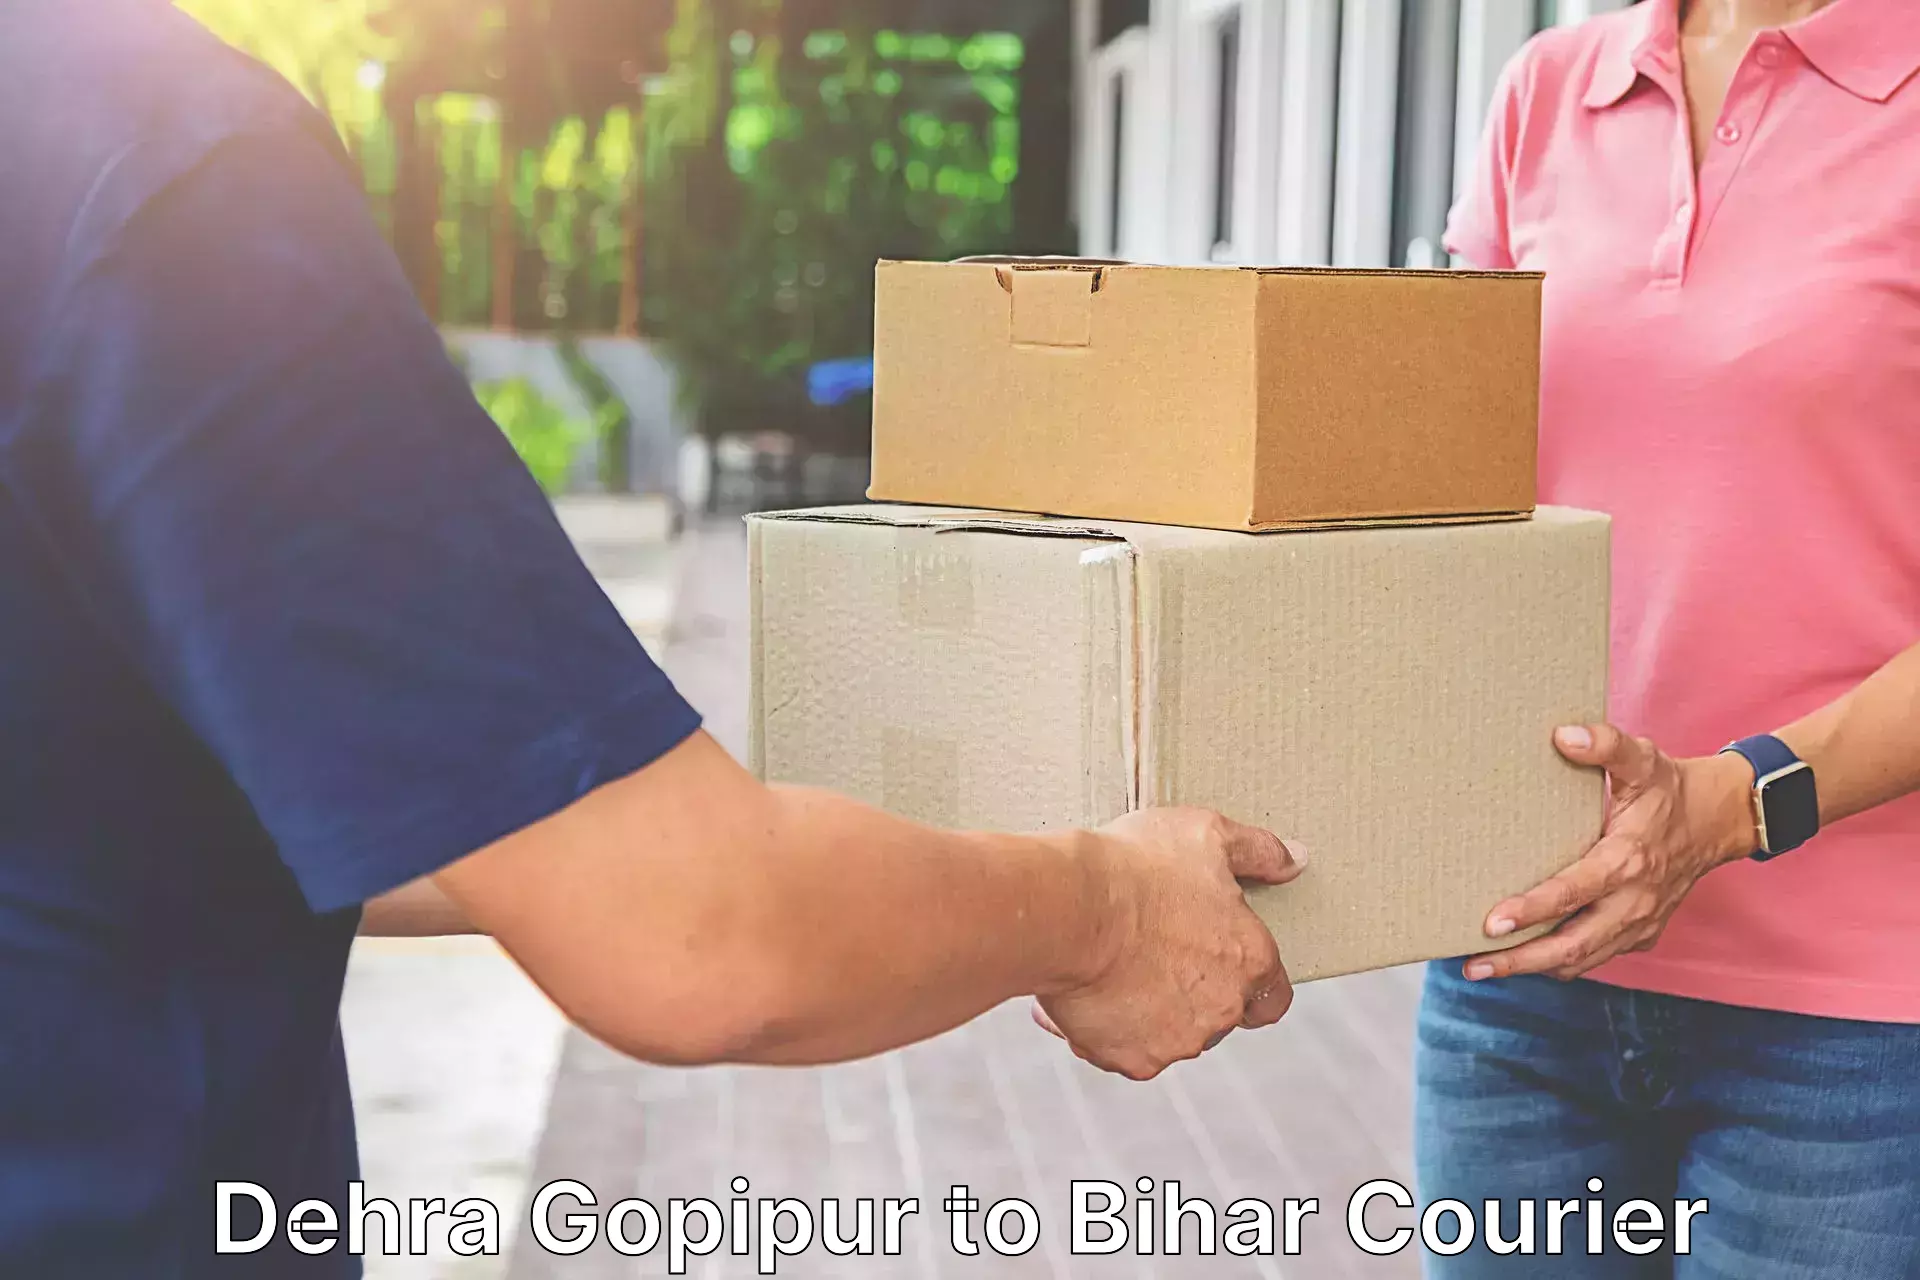 Automated shipping processes Dehra Gopipur to Sitamarhi